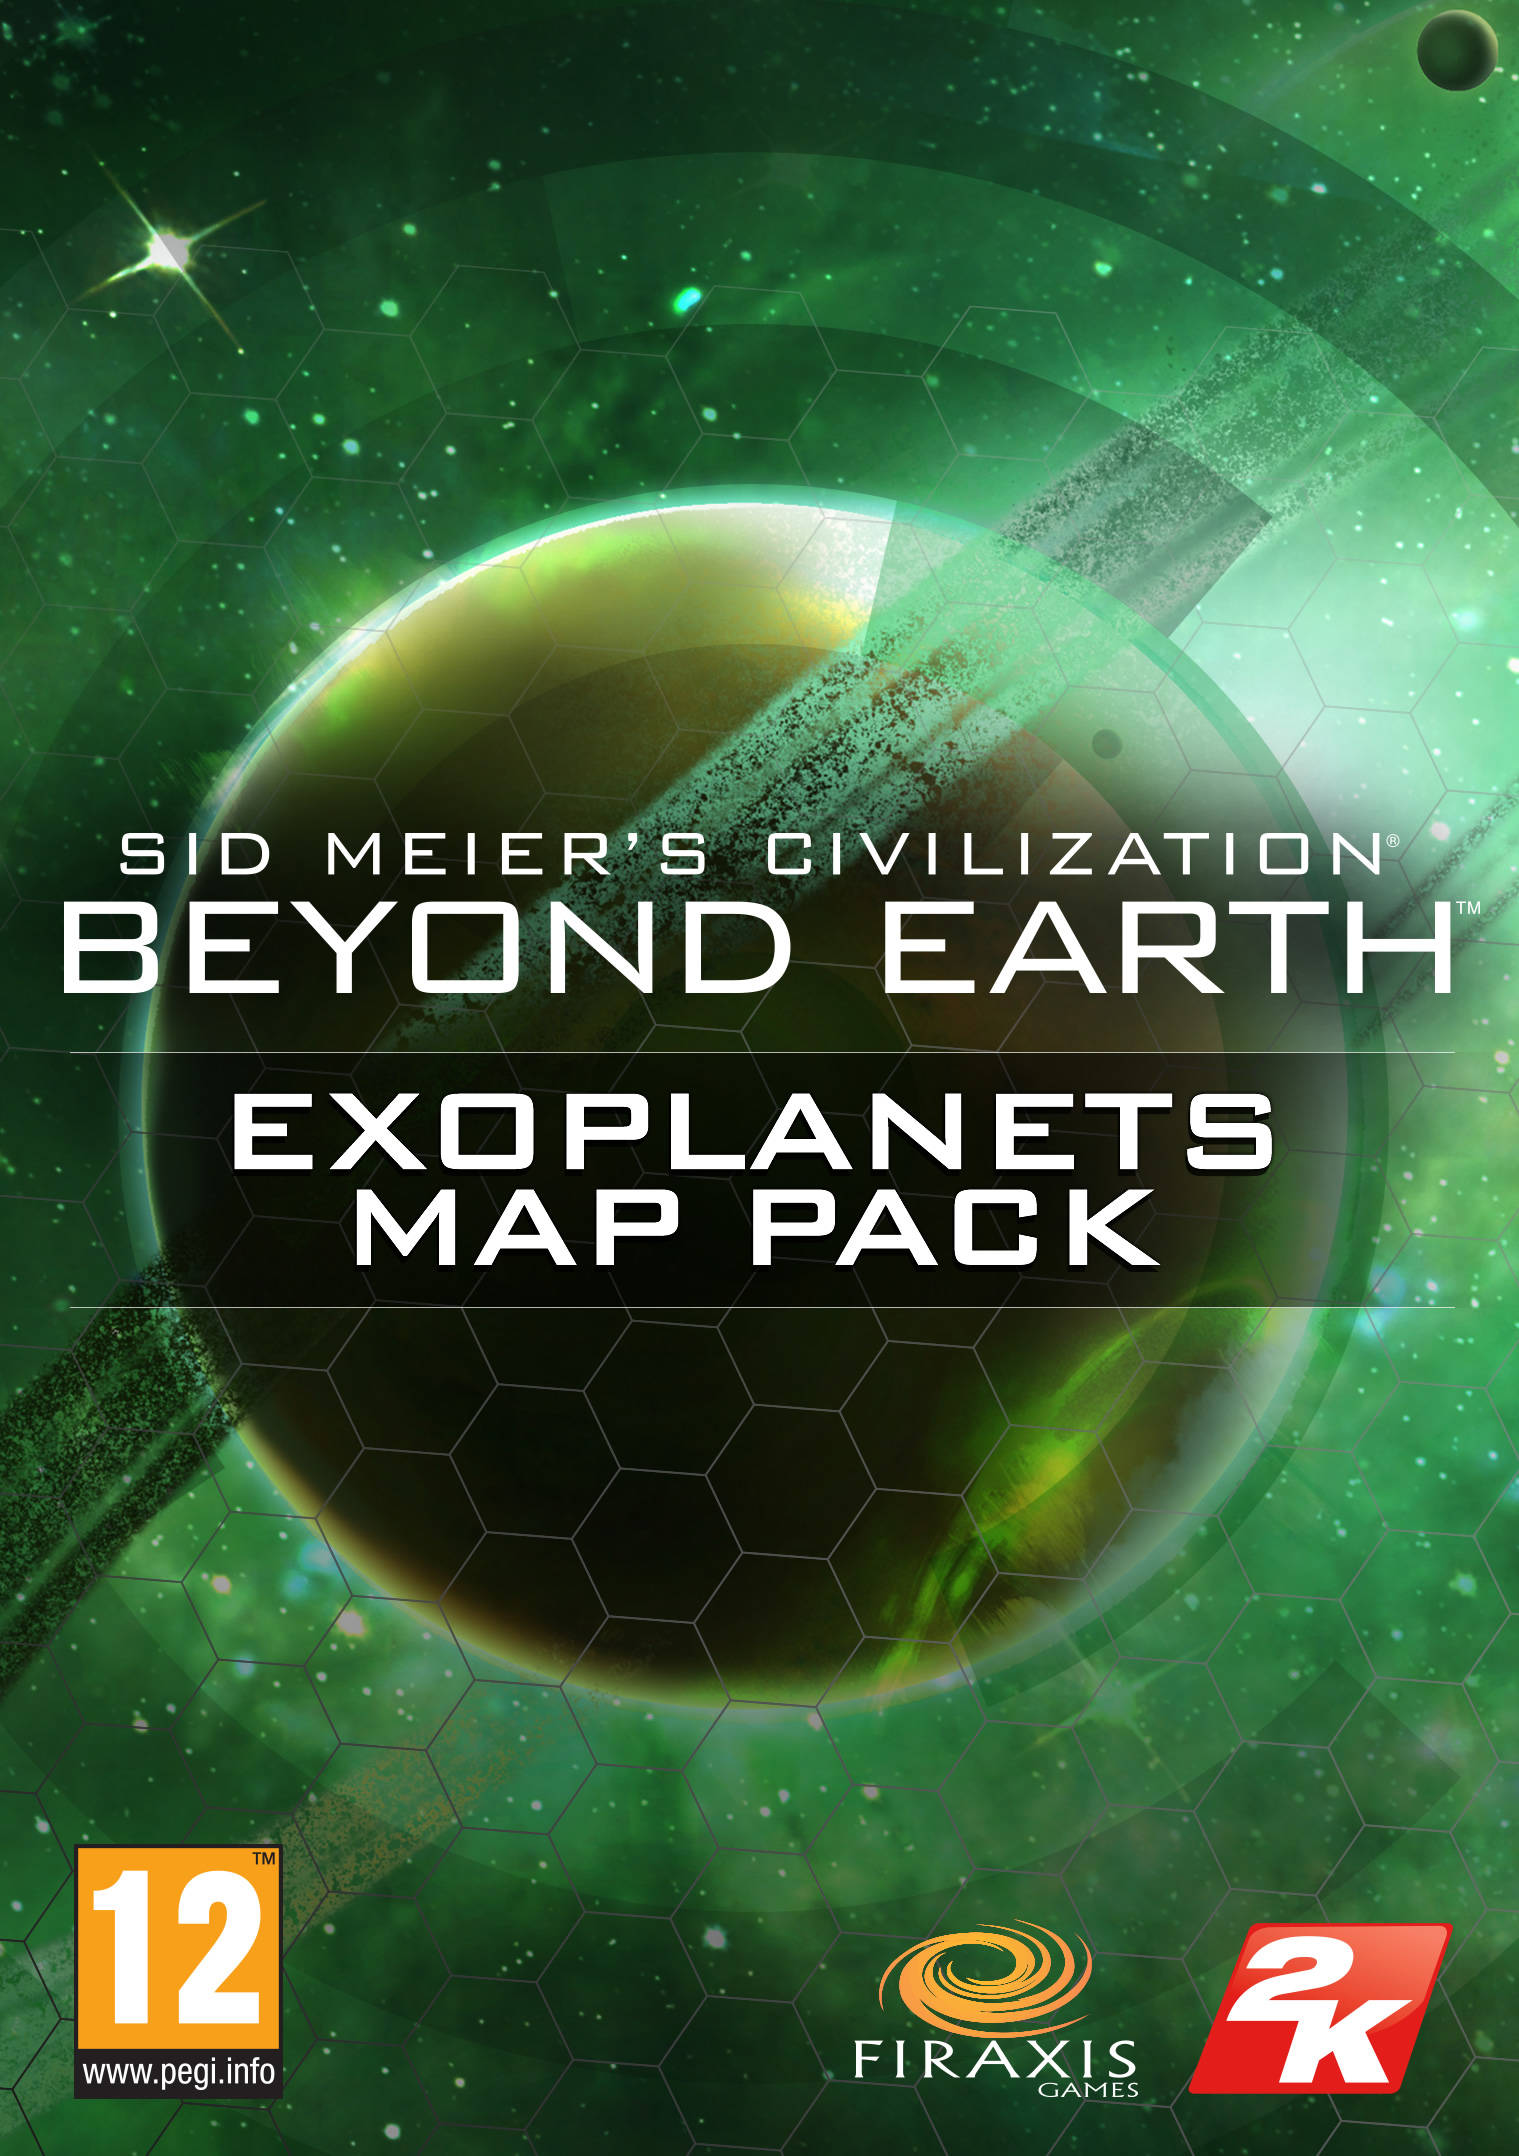 Sid Meier’s Civilization®: Beyond Earth™ - Exoplanets Map Pack